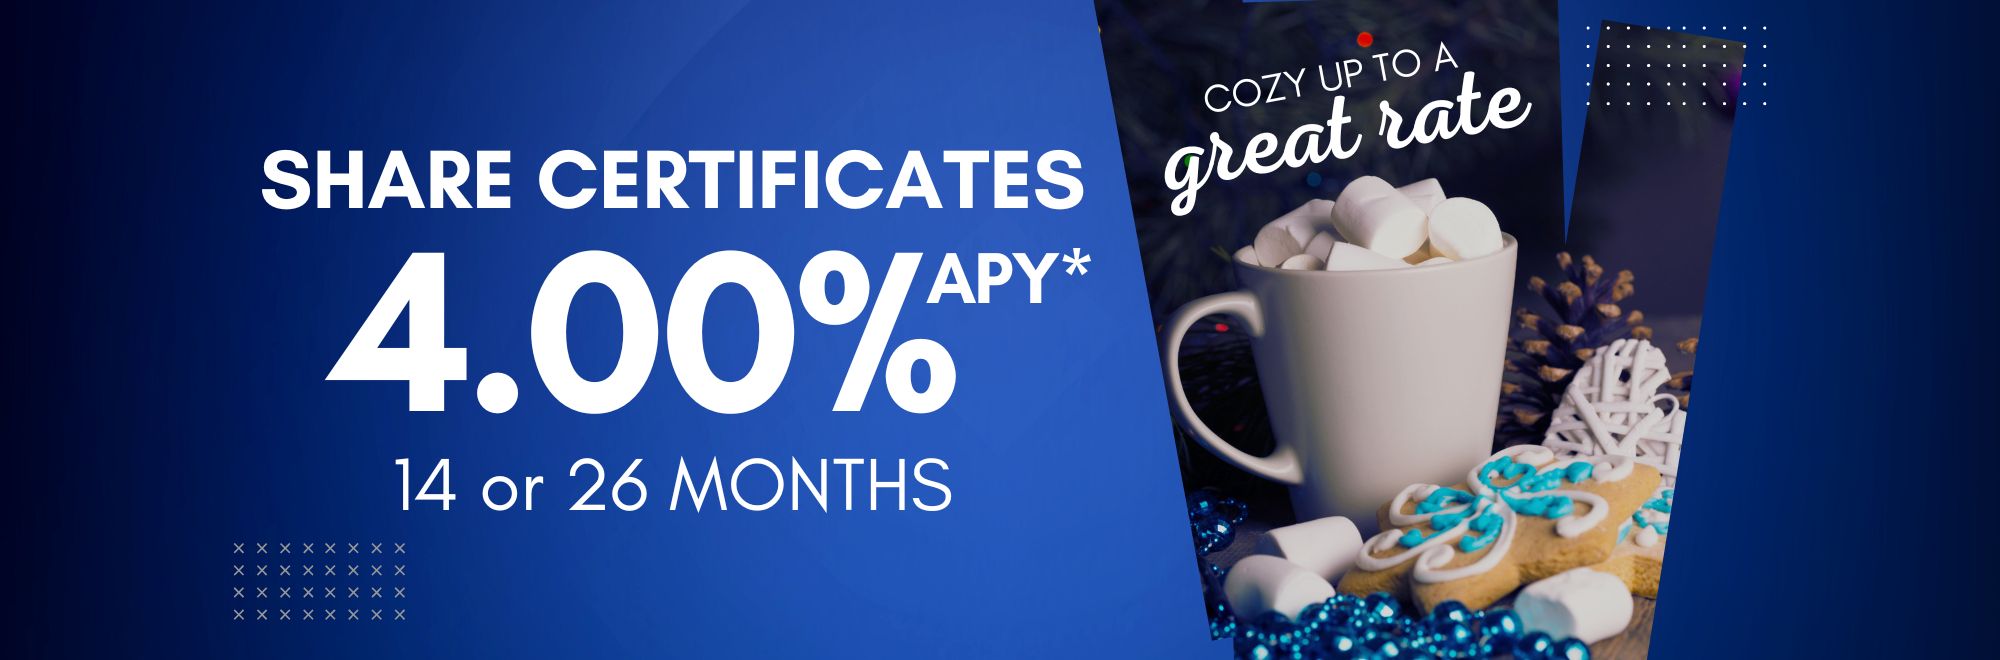 Cozy up to a great rate. Share Certificates 4.00%APY* 14 or 26 months